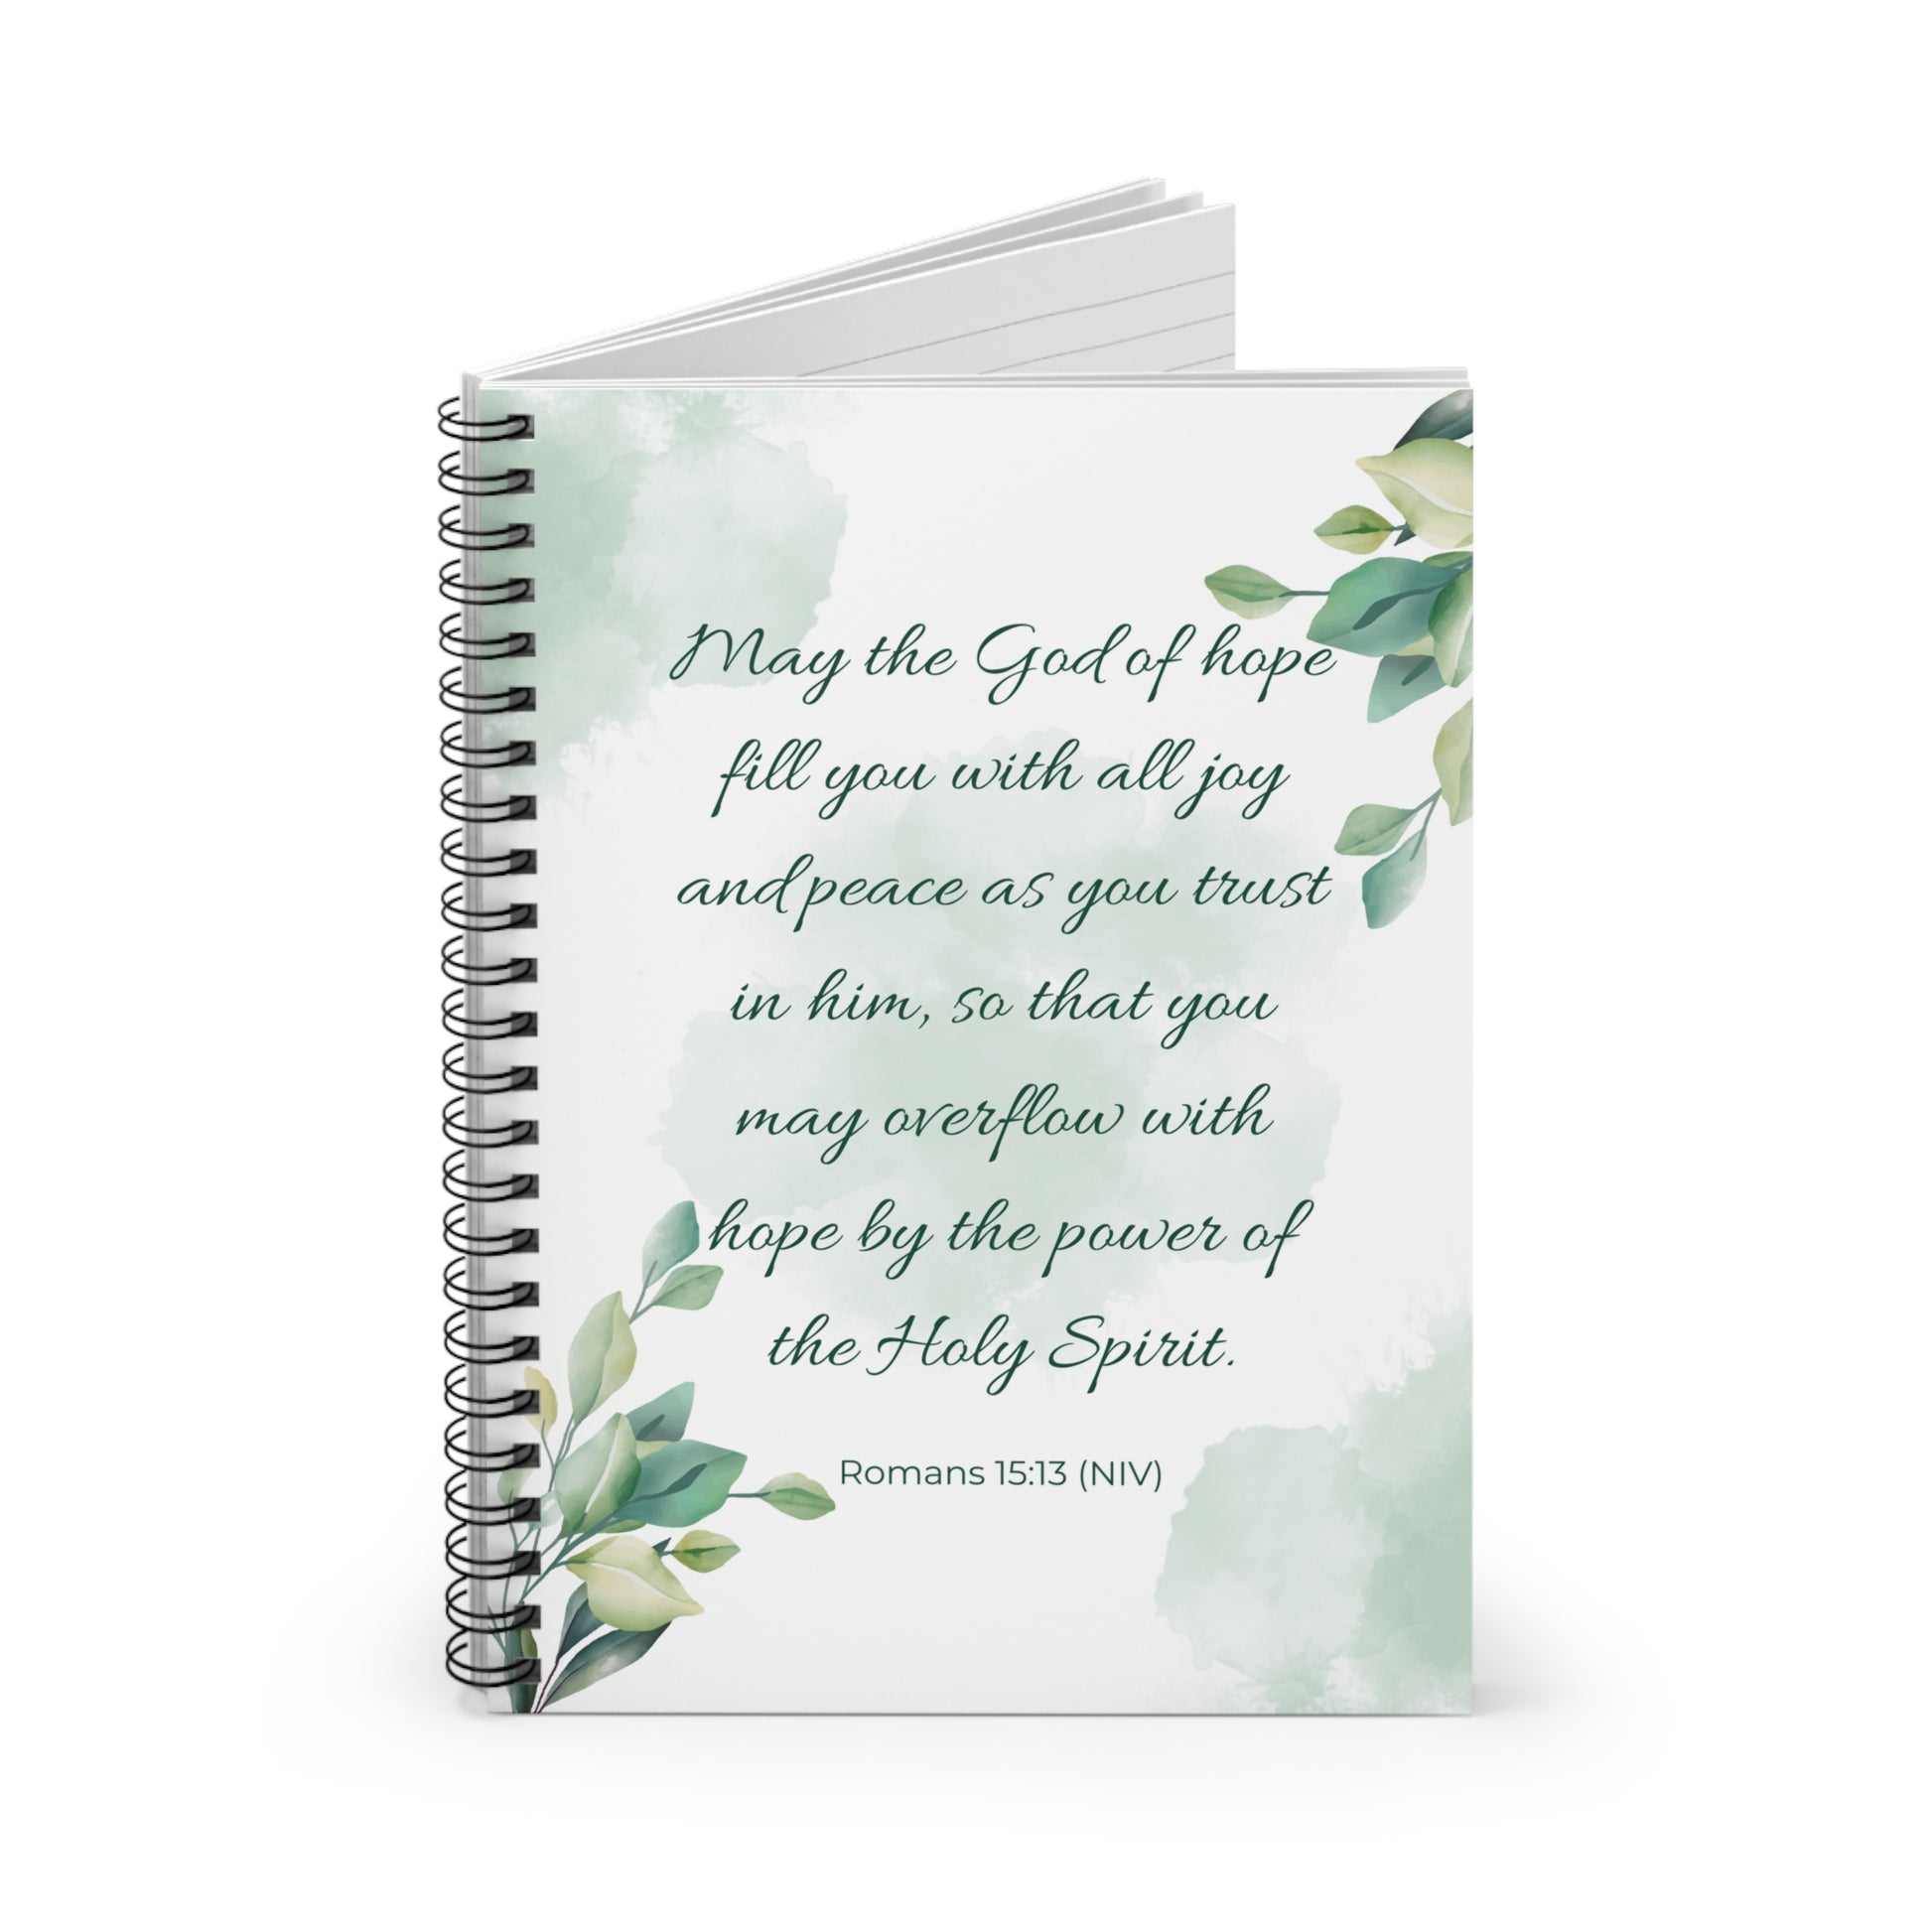 Radiant Hope Journal - A transformative collection inspired by Romans 15:13, guiding you to trust, joy, and peace. Immerse in reflections that overflow with hope through the power of the Holy Spirit. Elevate your spiritual journey with our Christian journals for a radiant and boundless hope.